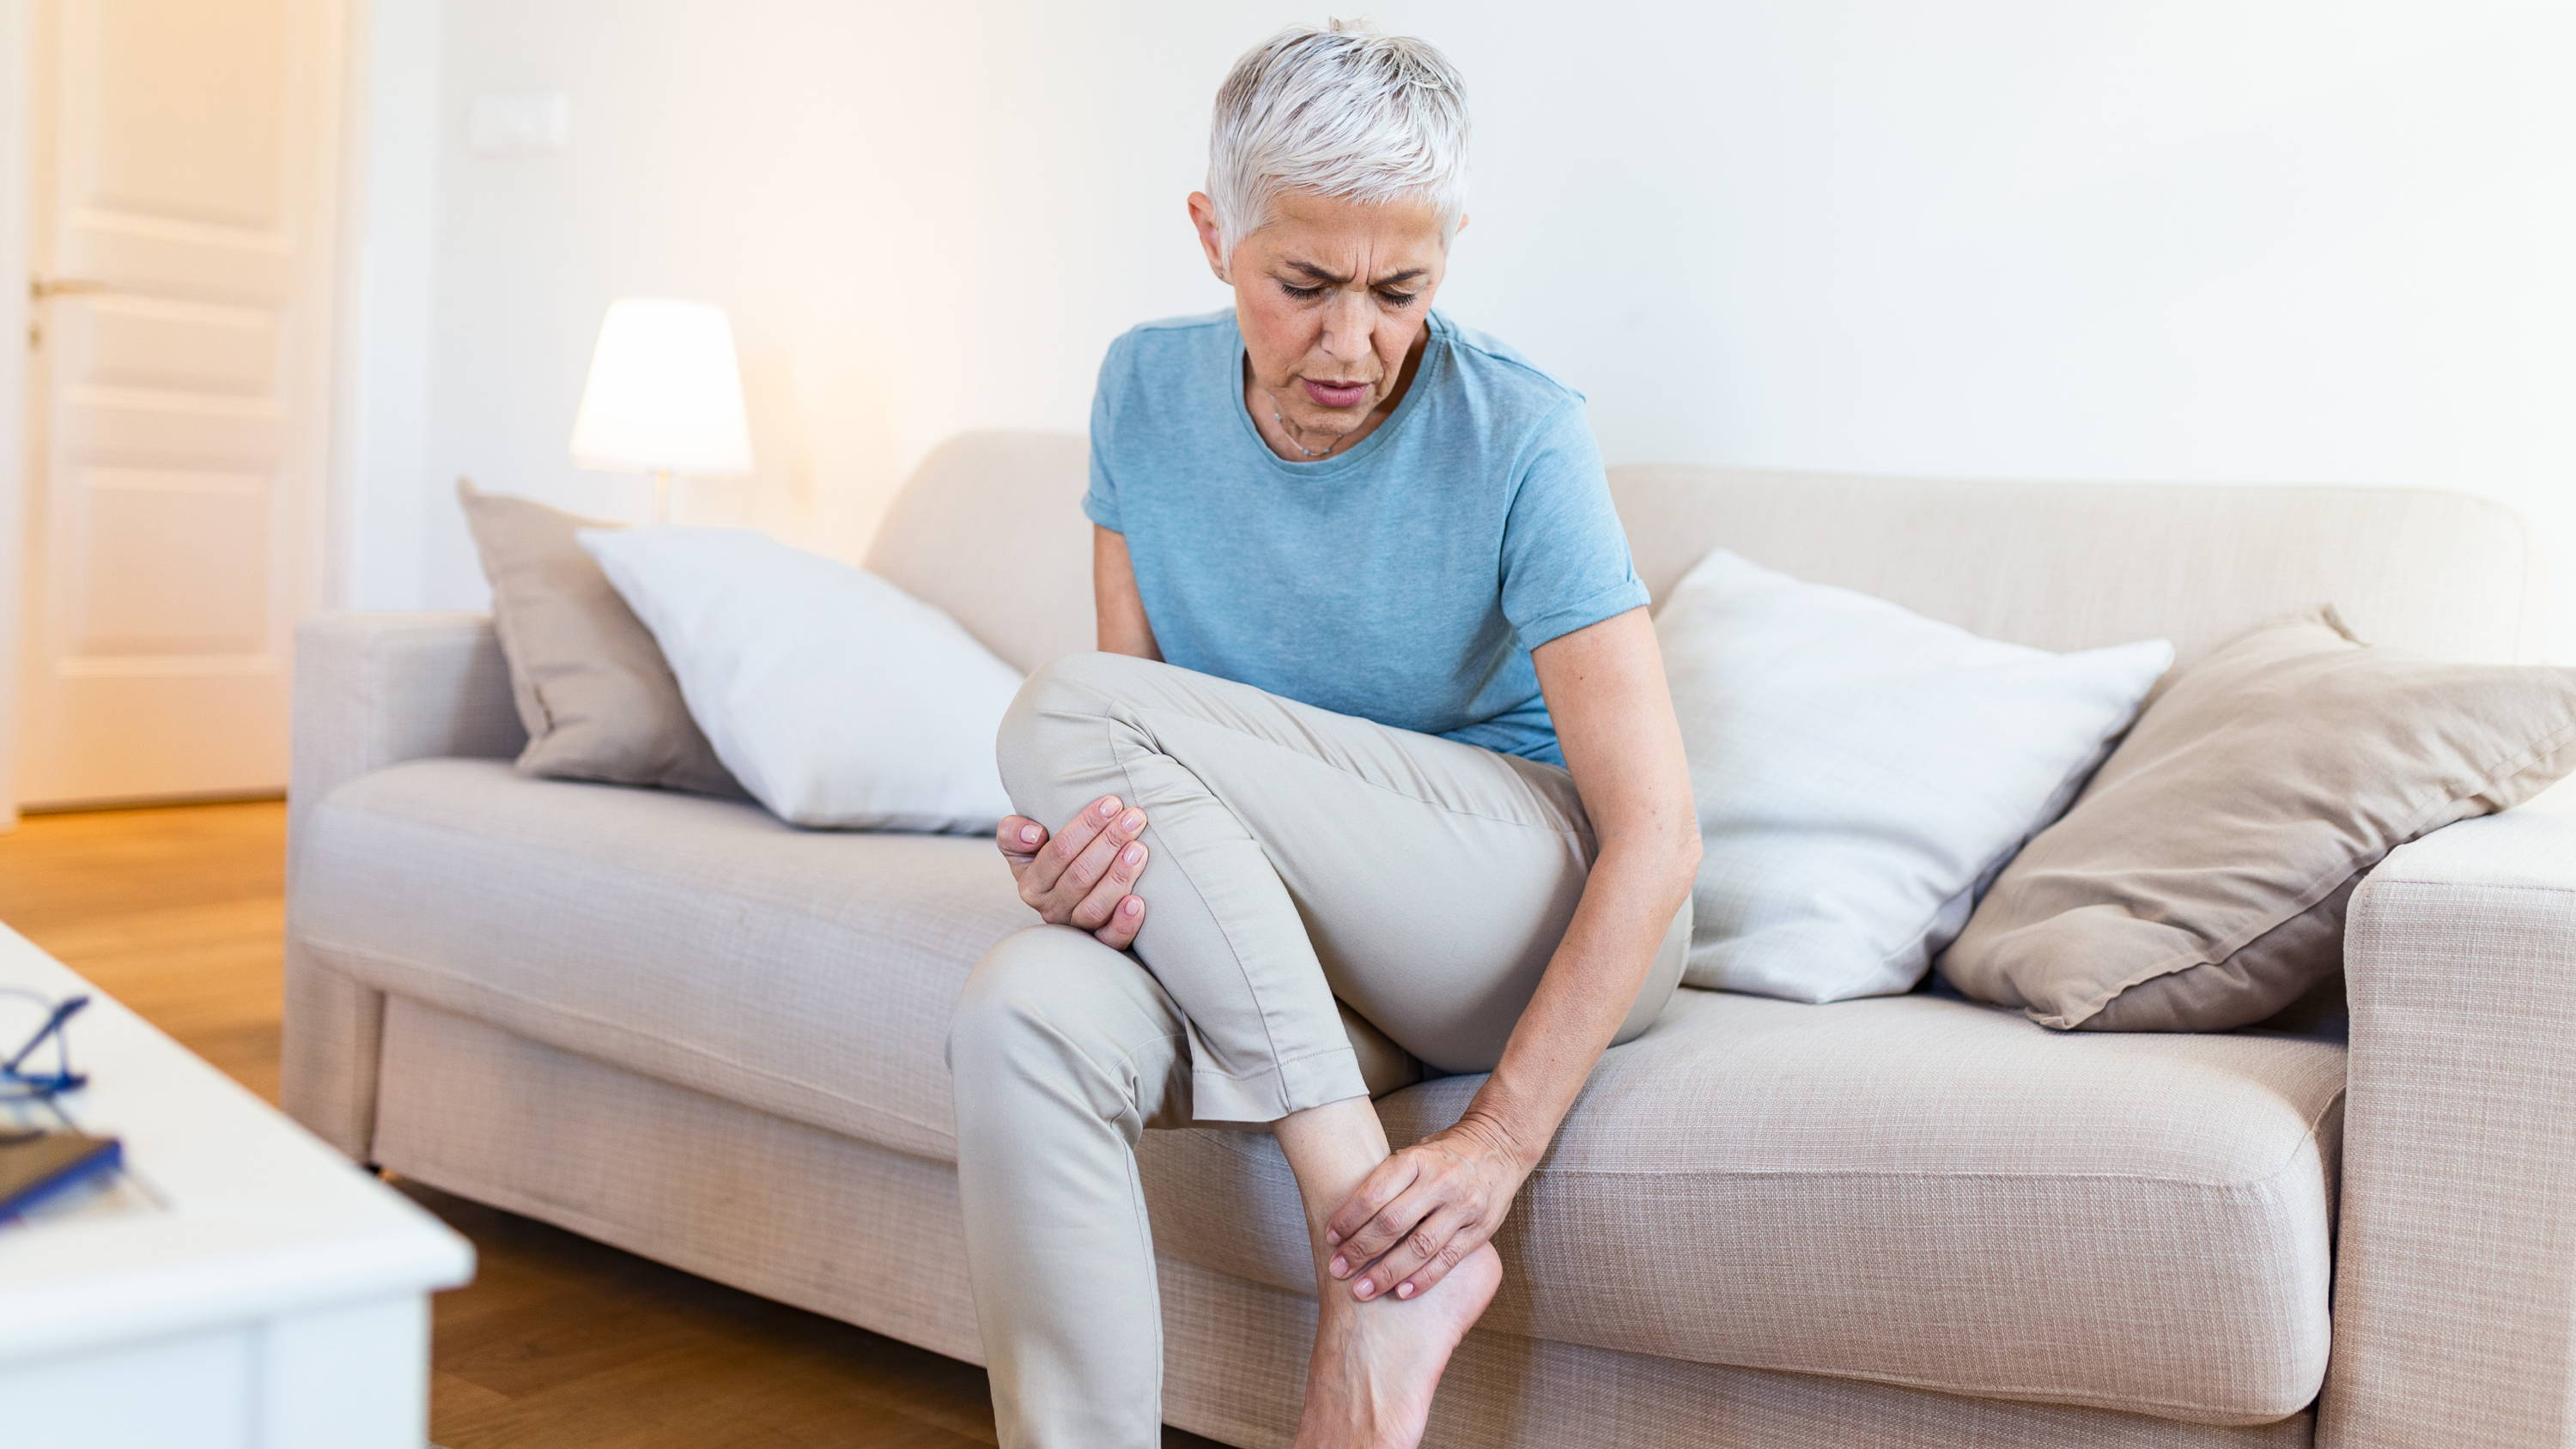 Older woman sitting on couch, massaging  a painful foot and leg